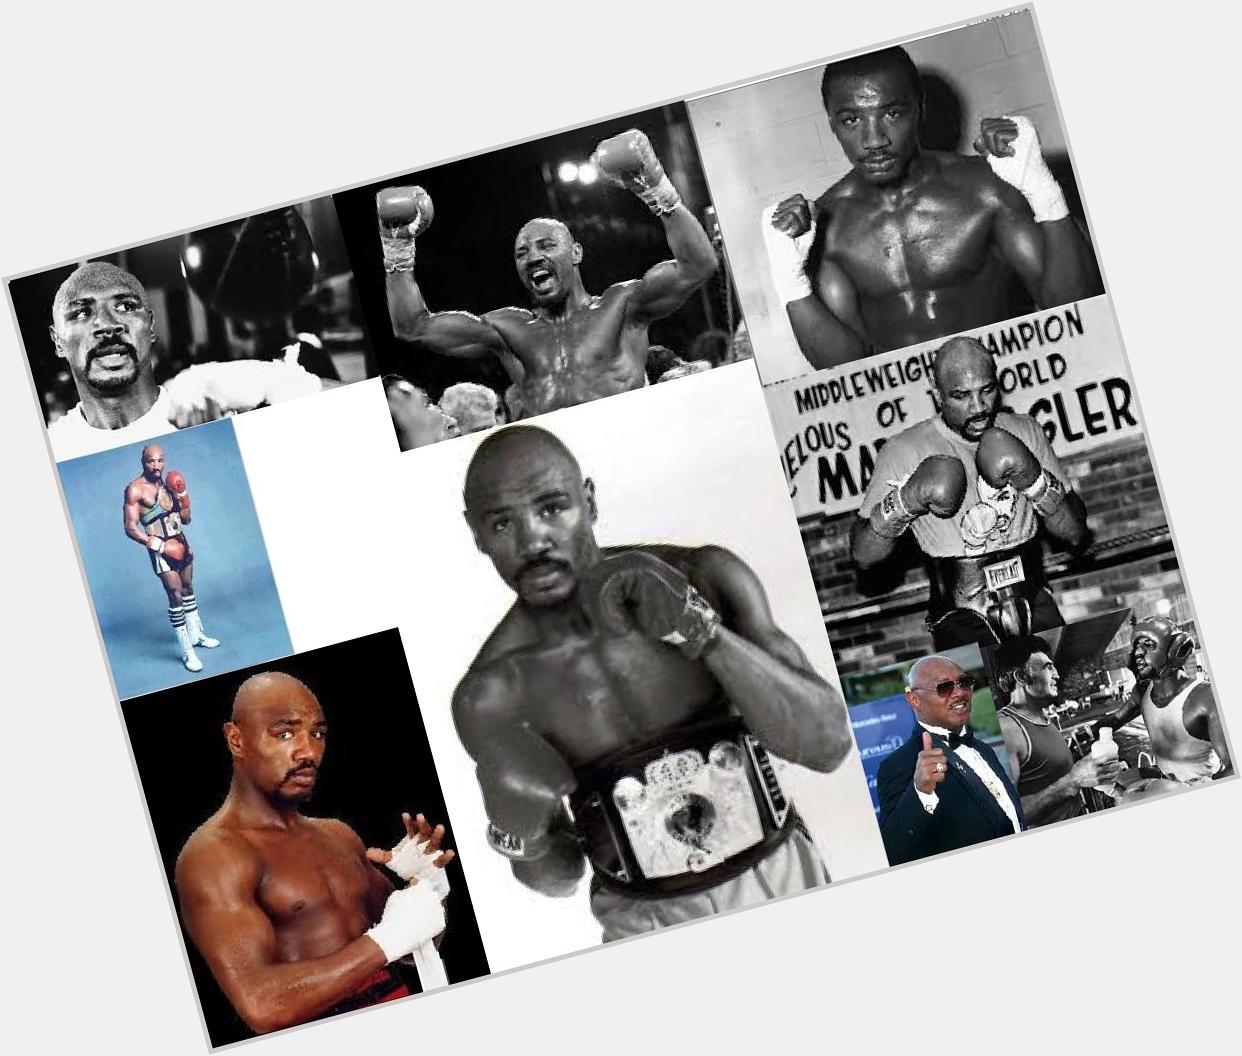   - Wishing The \"GREAT\" - BOXING - CHAMPION - MARVELOUS MARVIN HAGLER A HAPPY BIRTHDAY!!! 